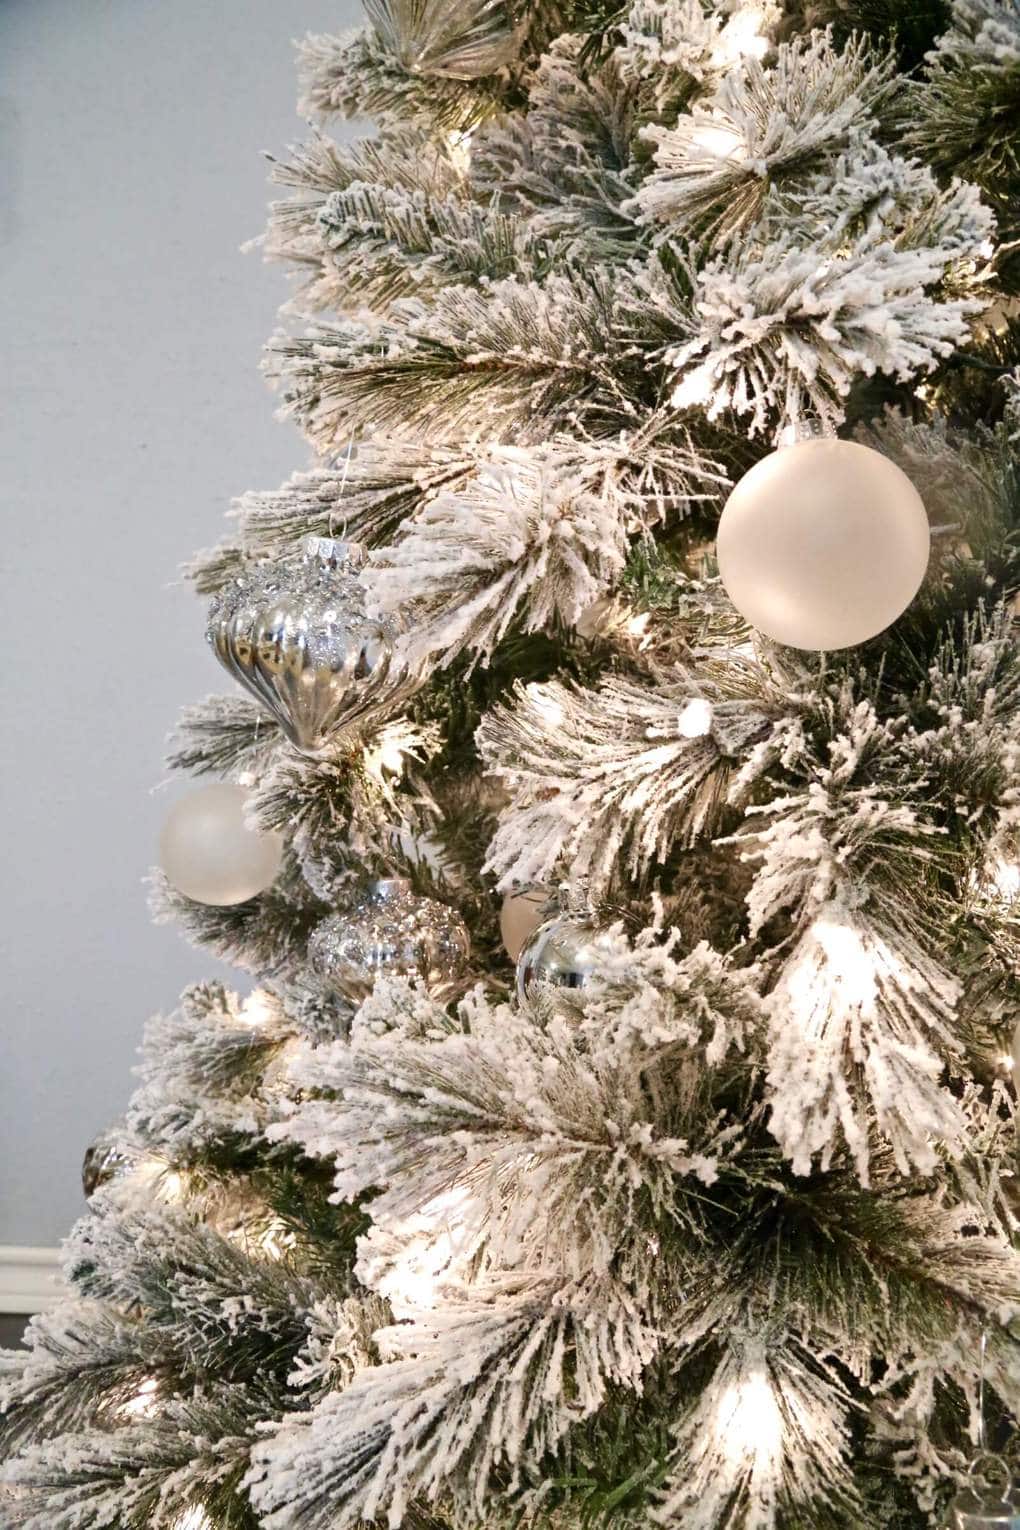 Great tips, tricks, and ideas for decorating for the Christmas season. This tree is so gorgeous and these tips are such a practical way to get your home looking great for Christmas without a ton of effort